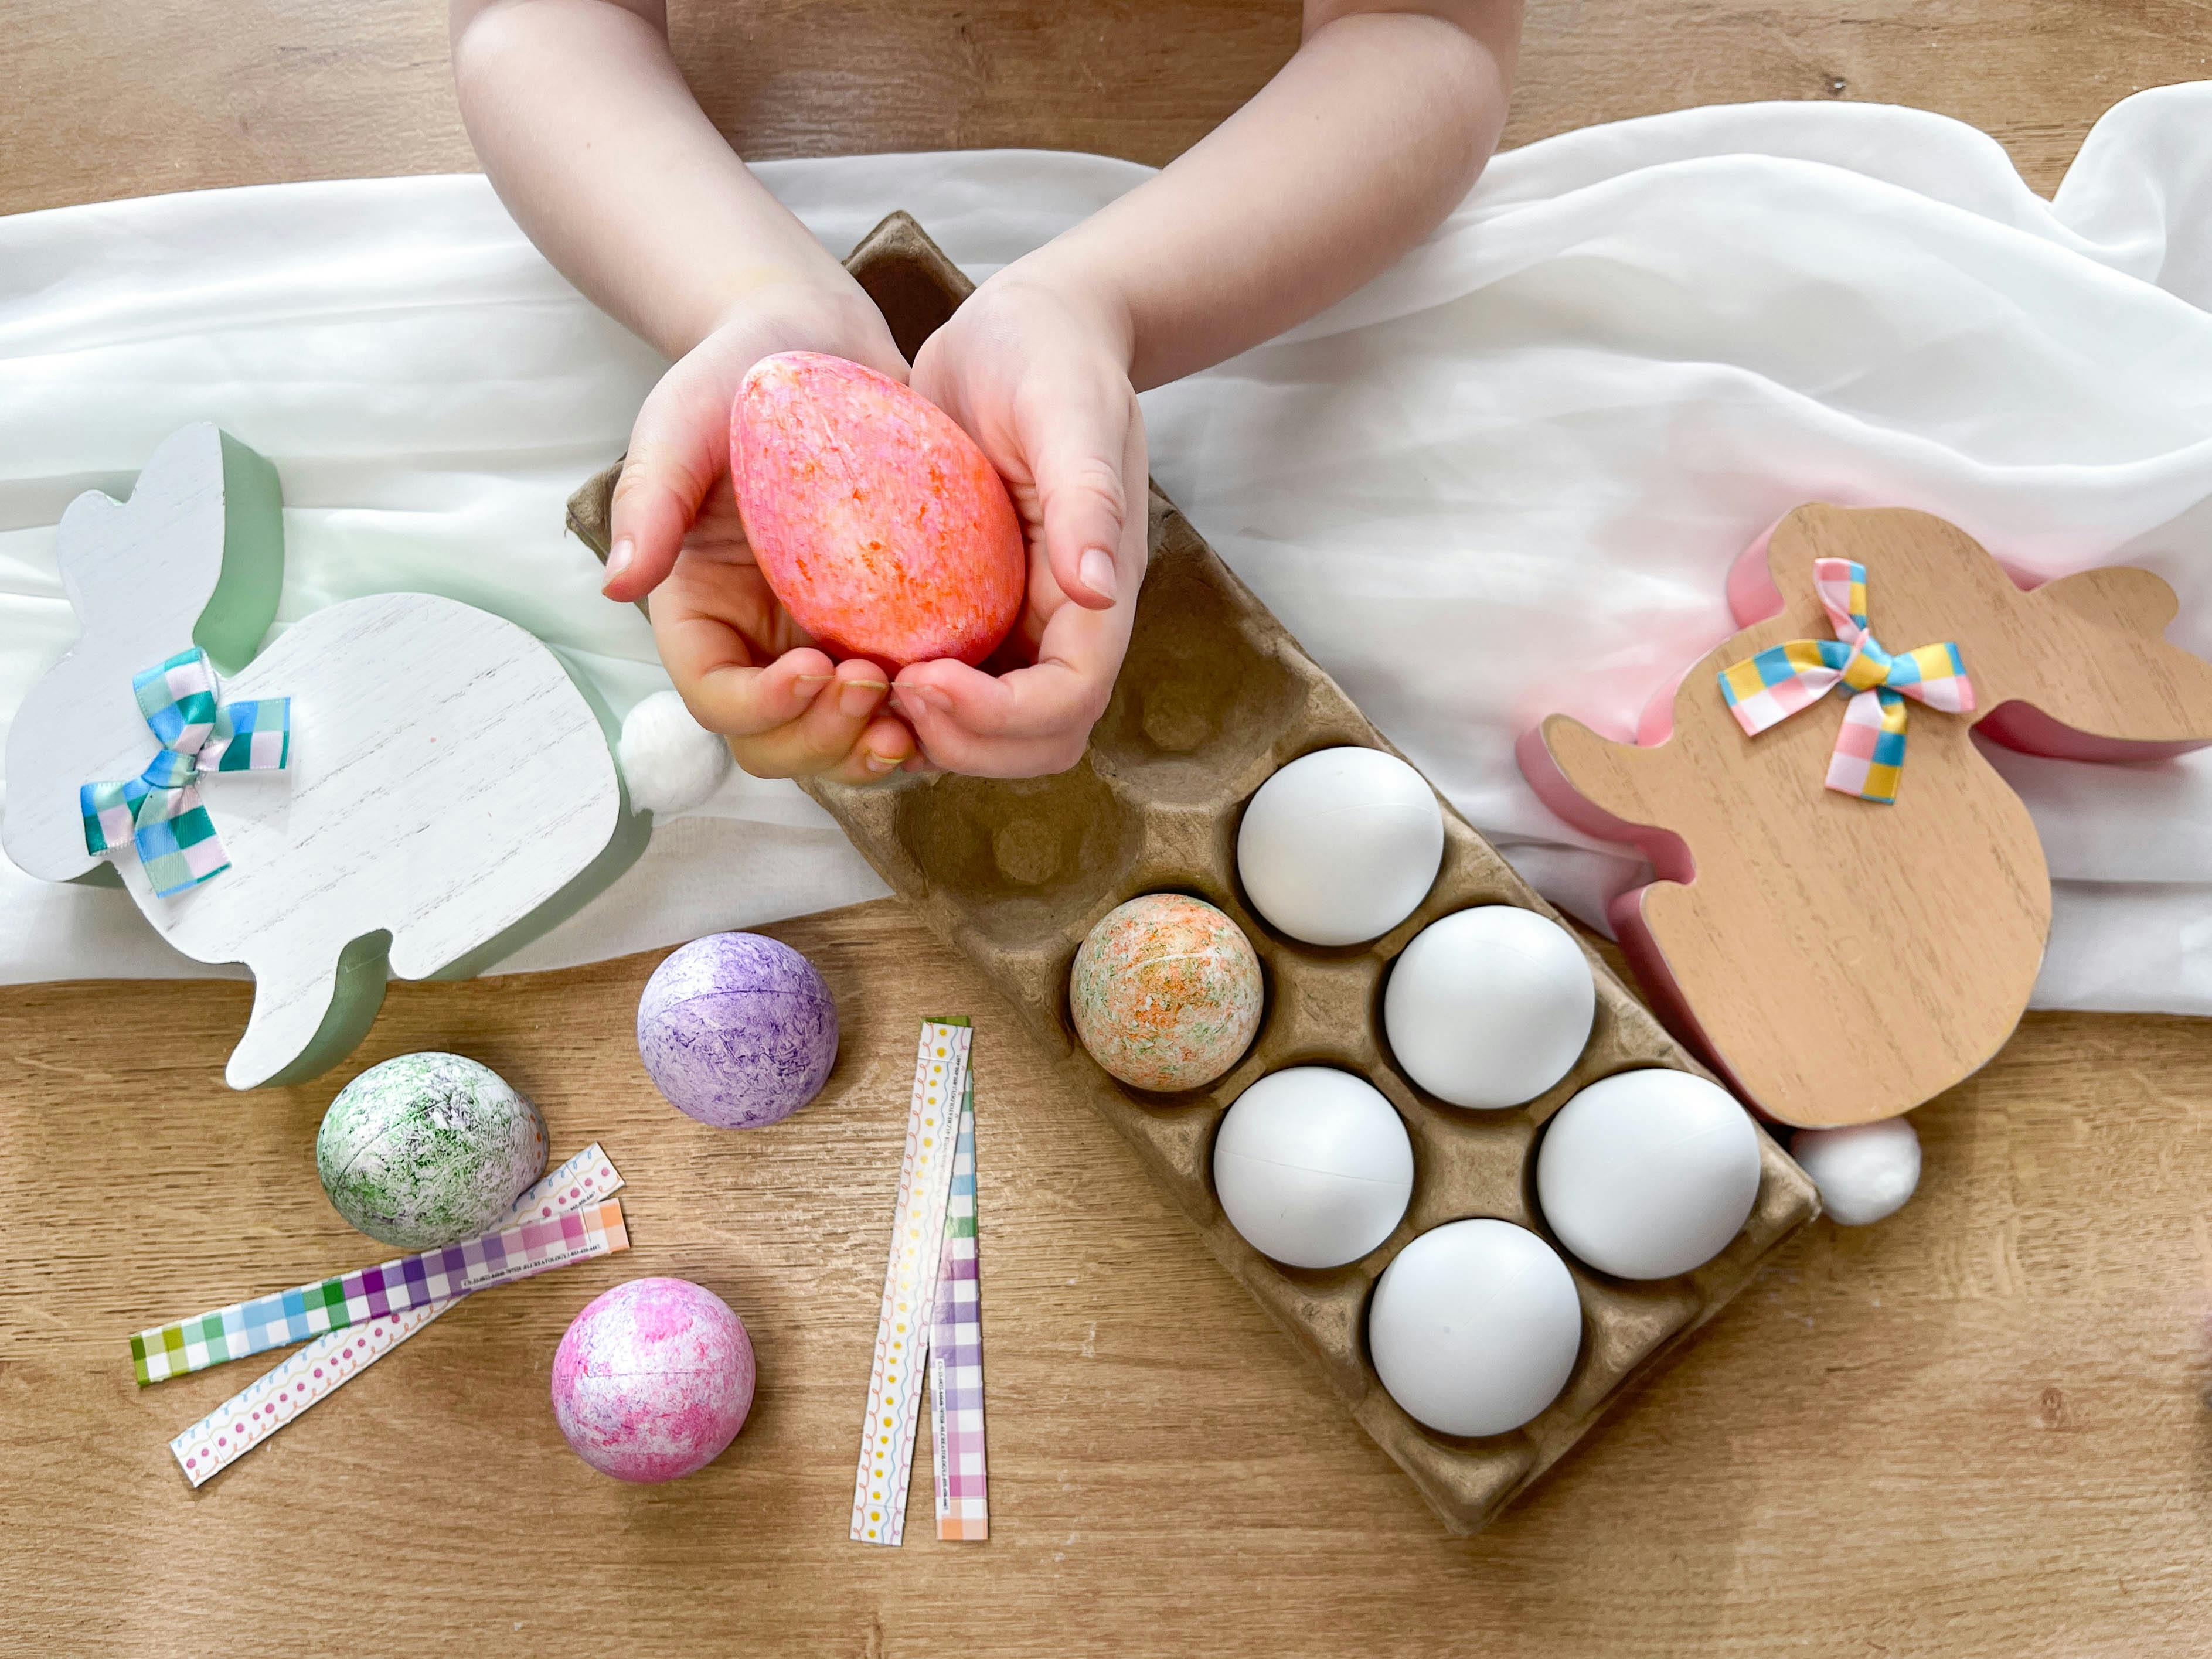 a kid holding a dyed egg near other plastic eggs and easter decor